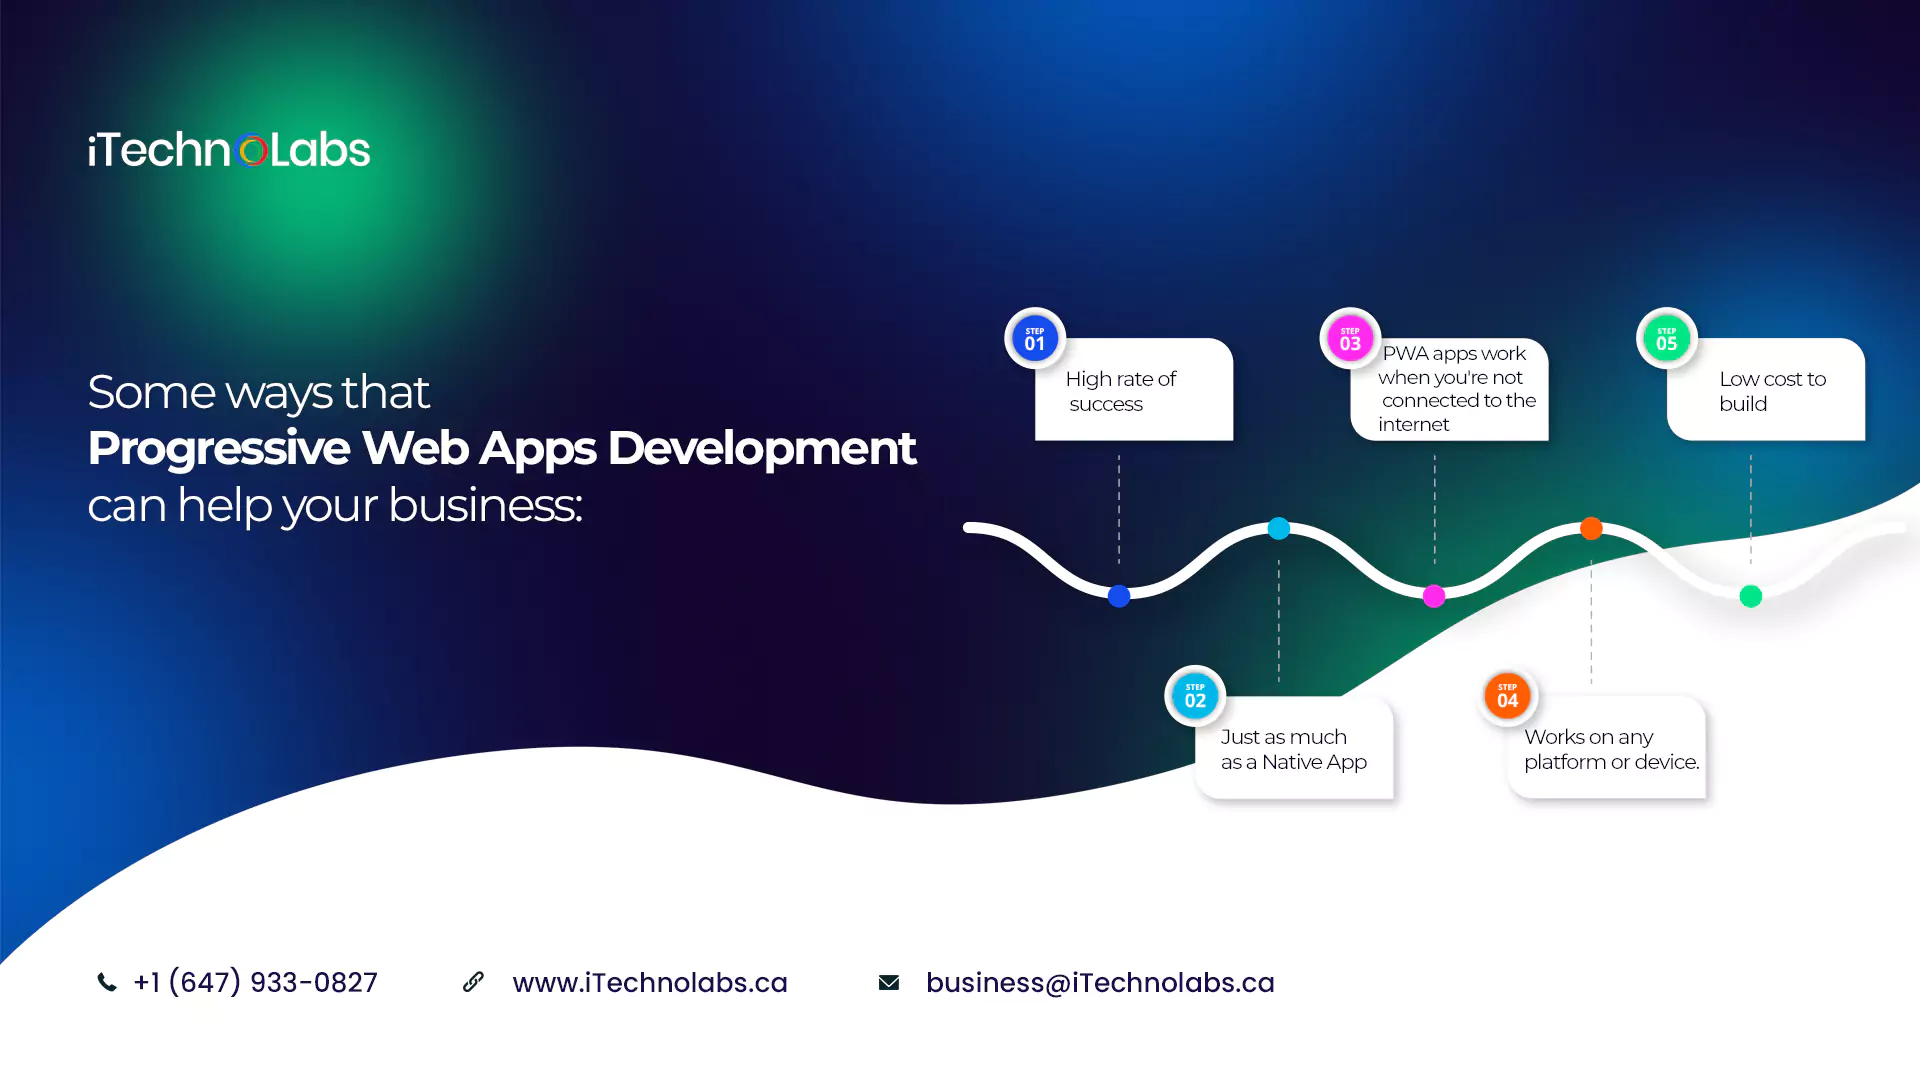 Some ways that Progressive Web Apps Development can help your business